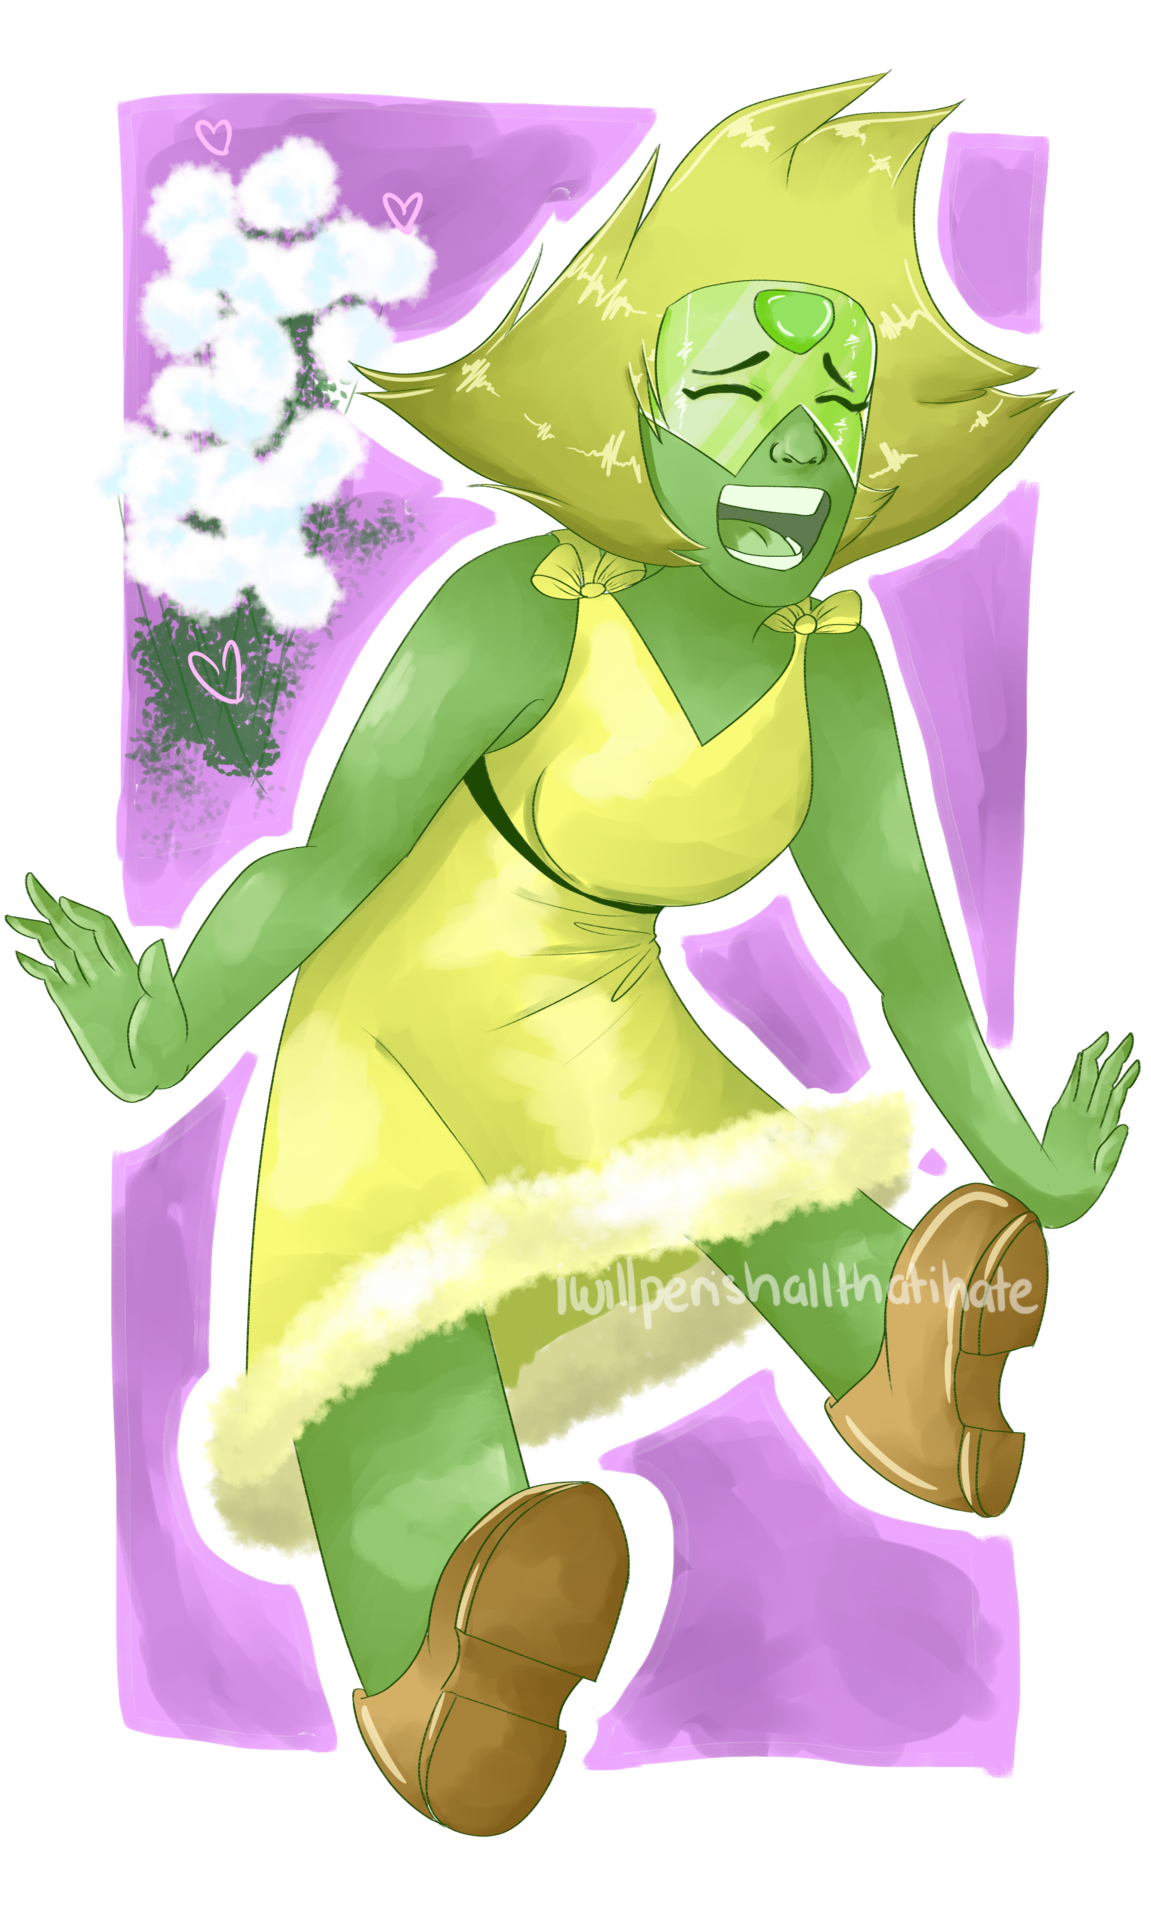 so peridot was adorable and i love her??